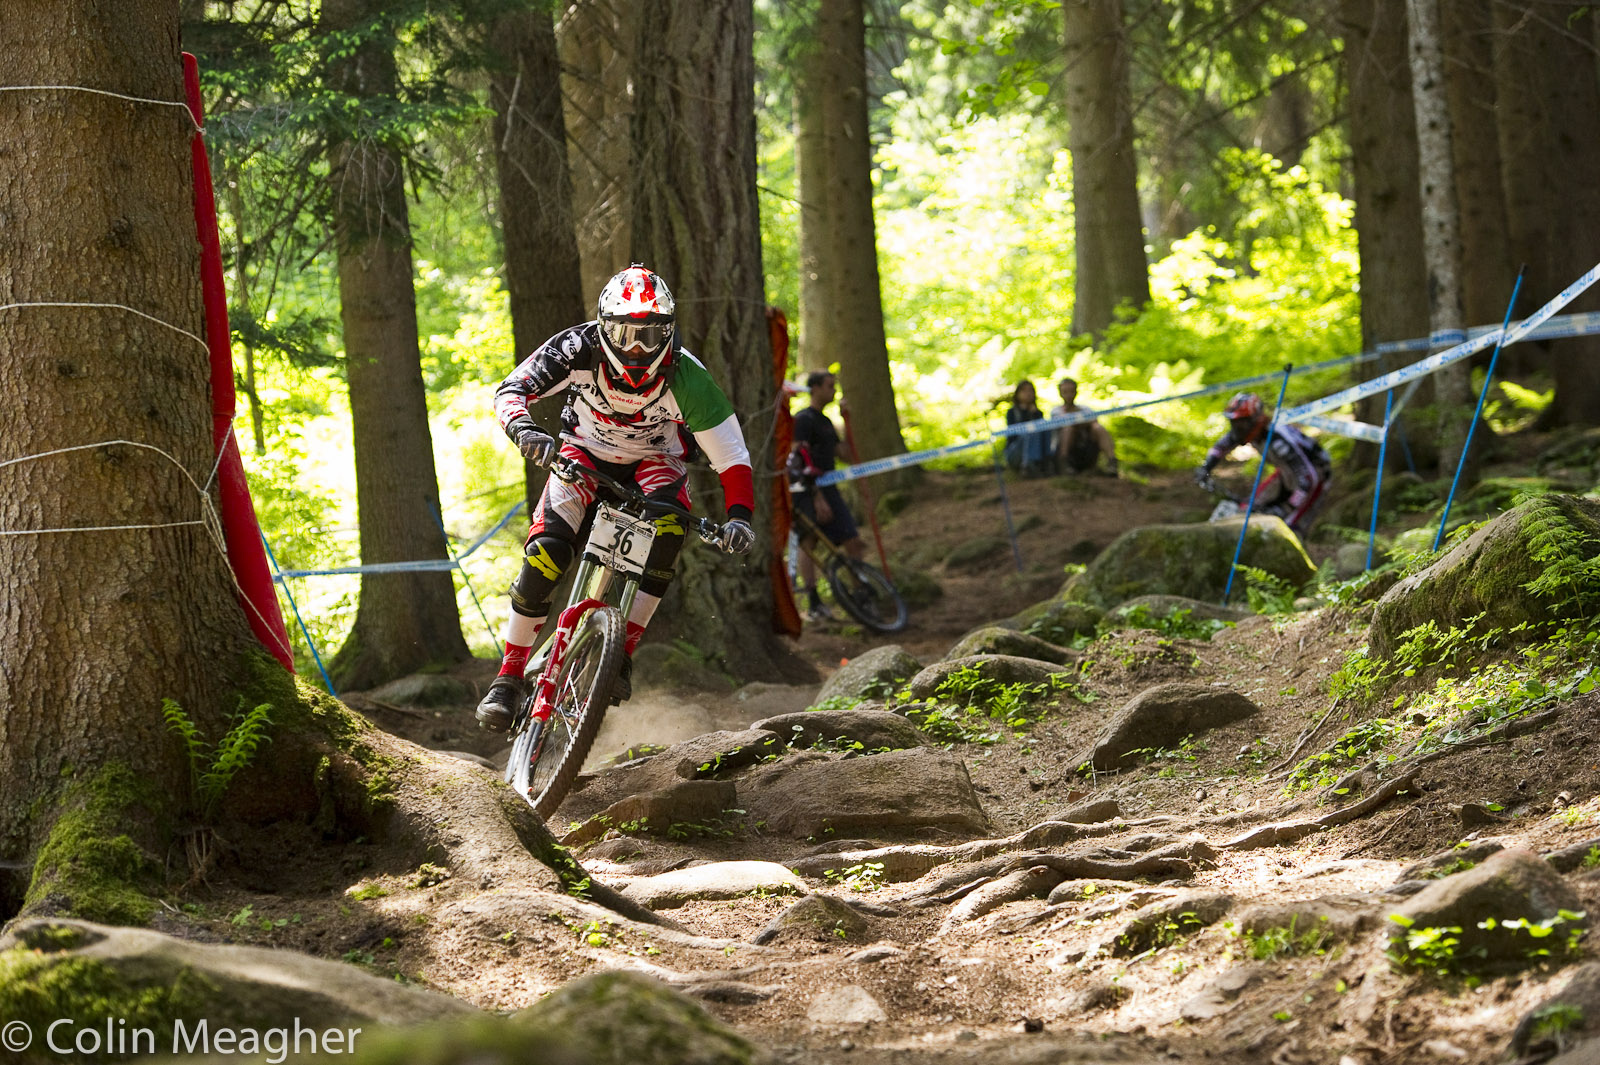 Italian Champion Lorenzo Sudding got a huge roar from the crowd as he roared down the course.